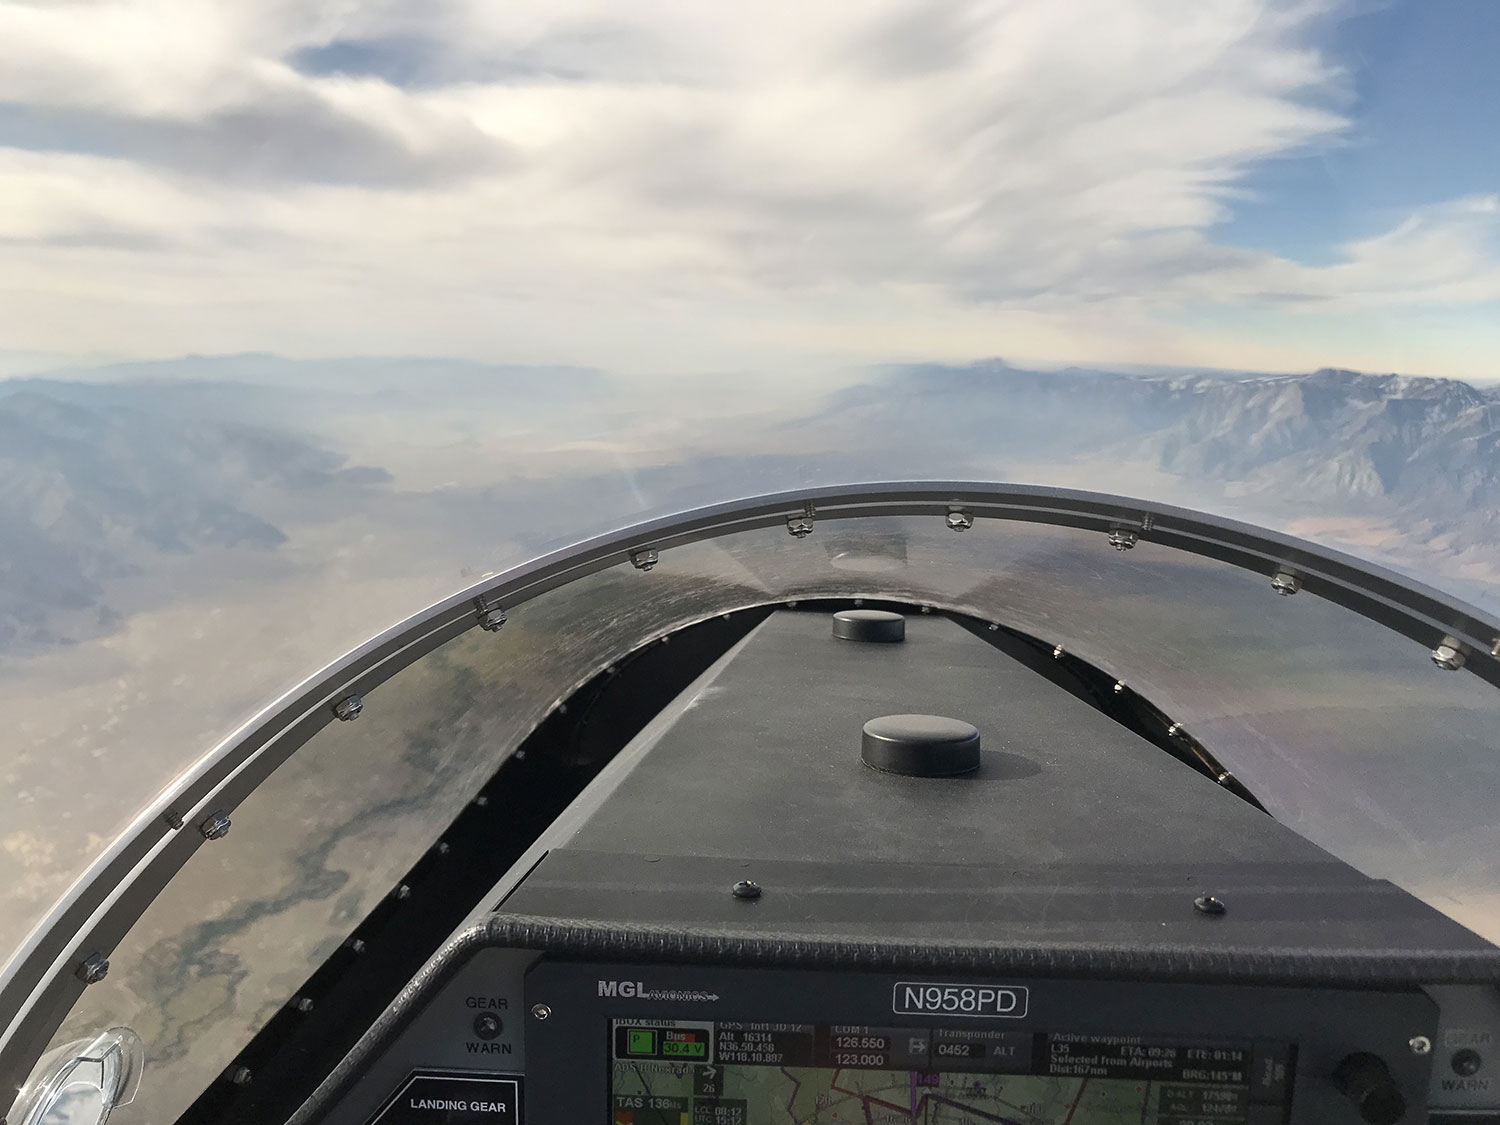 Looking south down the Owens Valley, with the Sierra on the right, its clear you’re above the nasty bumps down low that are rolling off the high peaks.